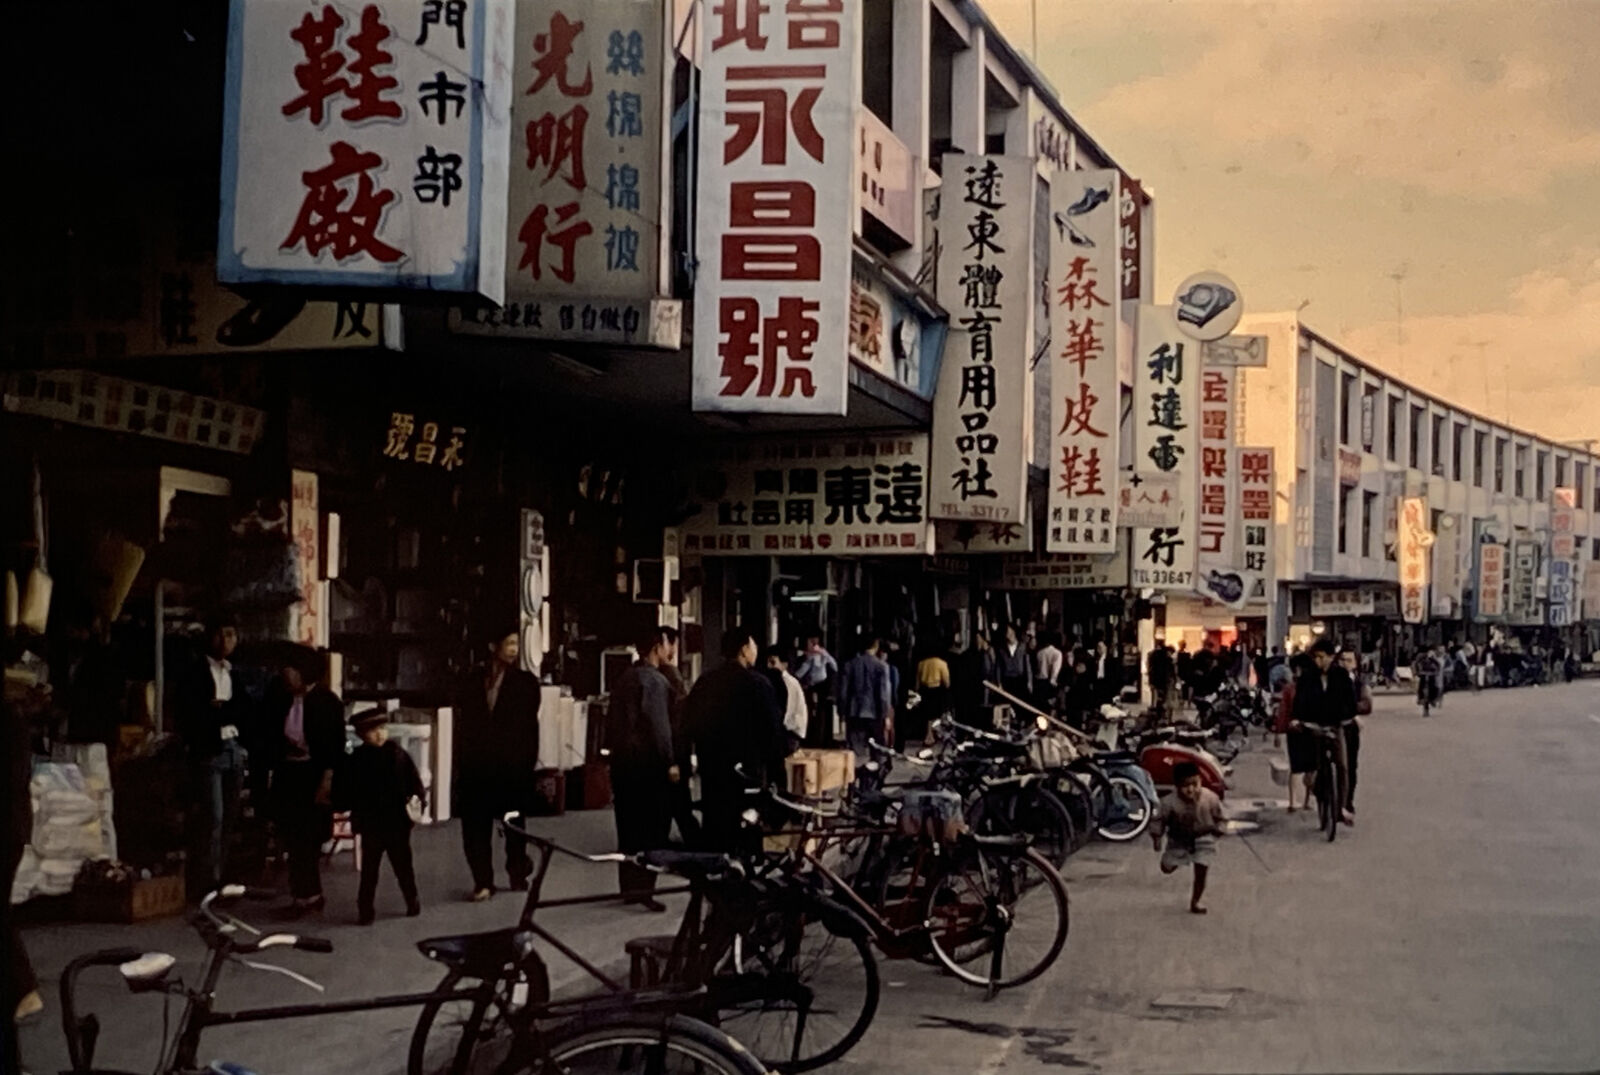 1965 Kodachrome Slide China possibly Taiwan Street Scene Stores Bicycles People